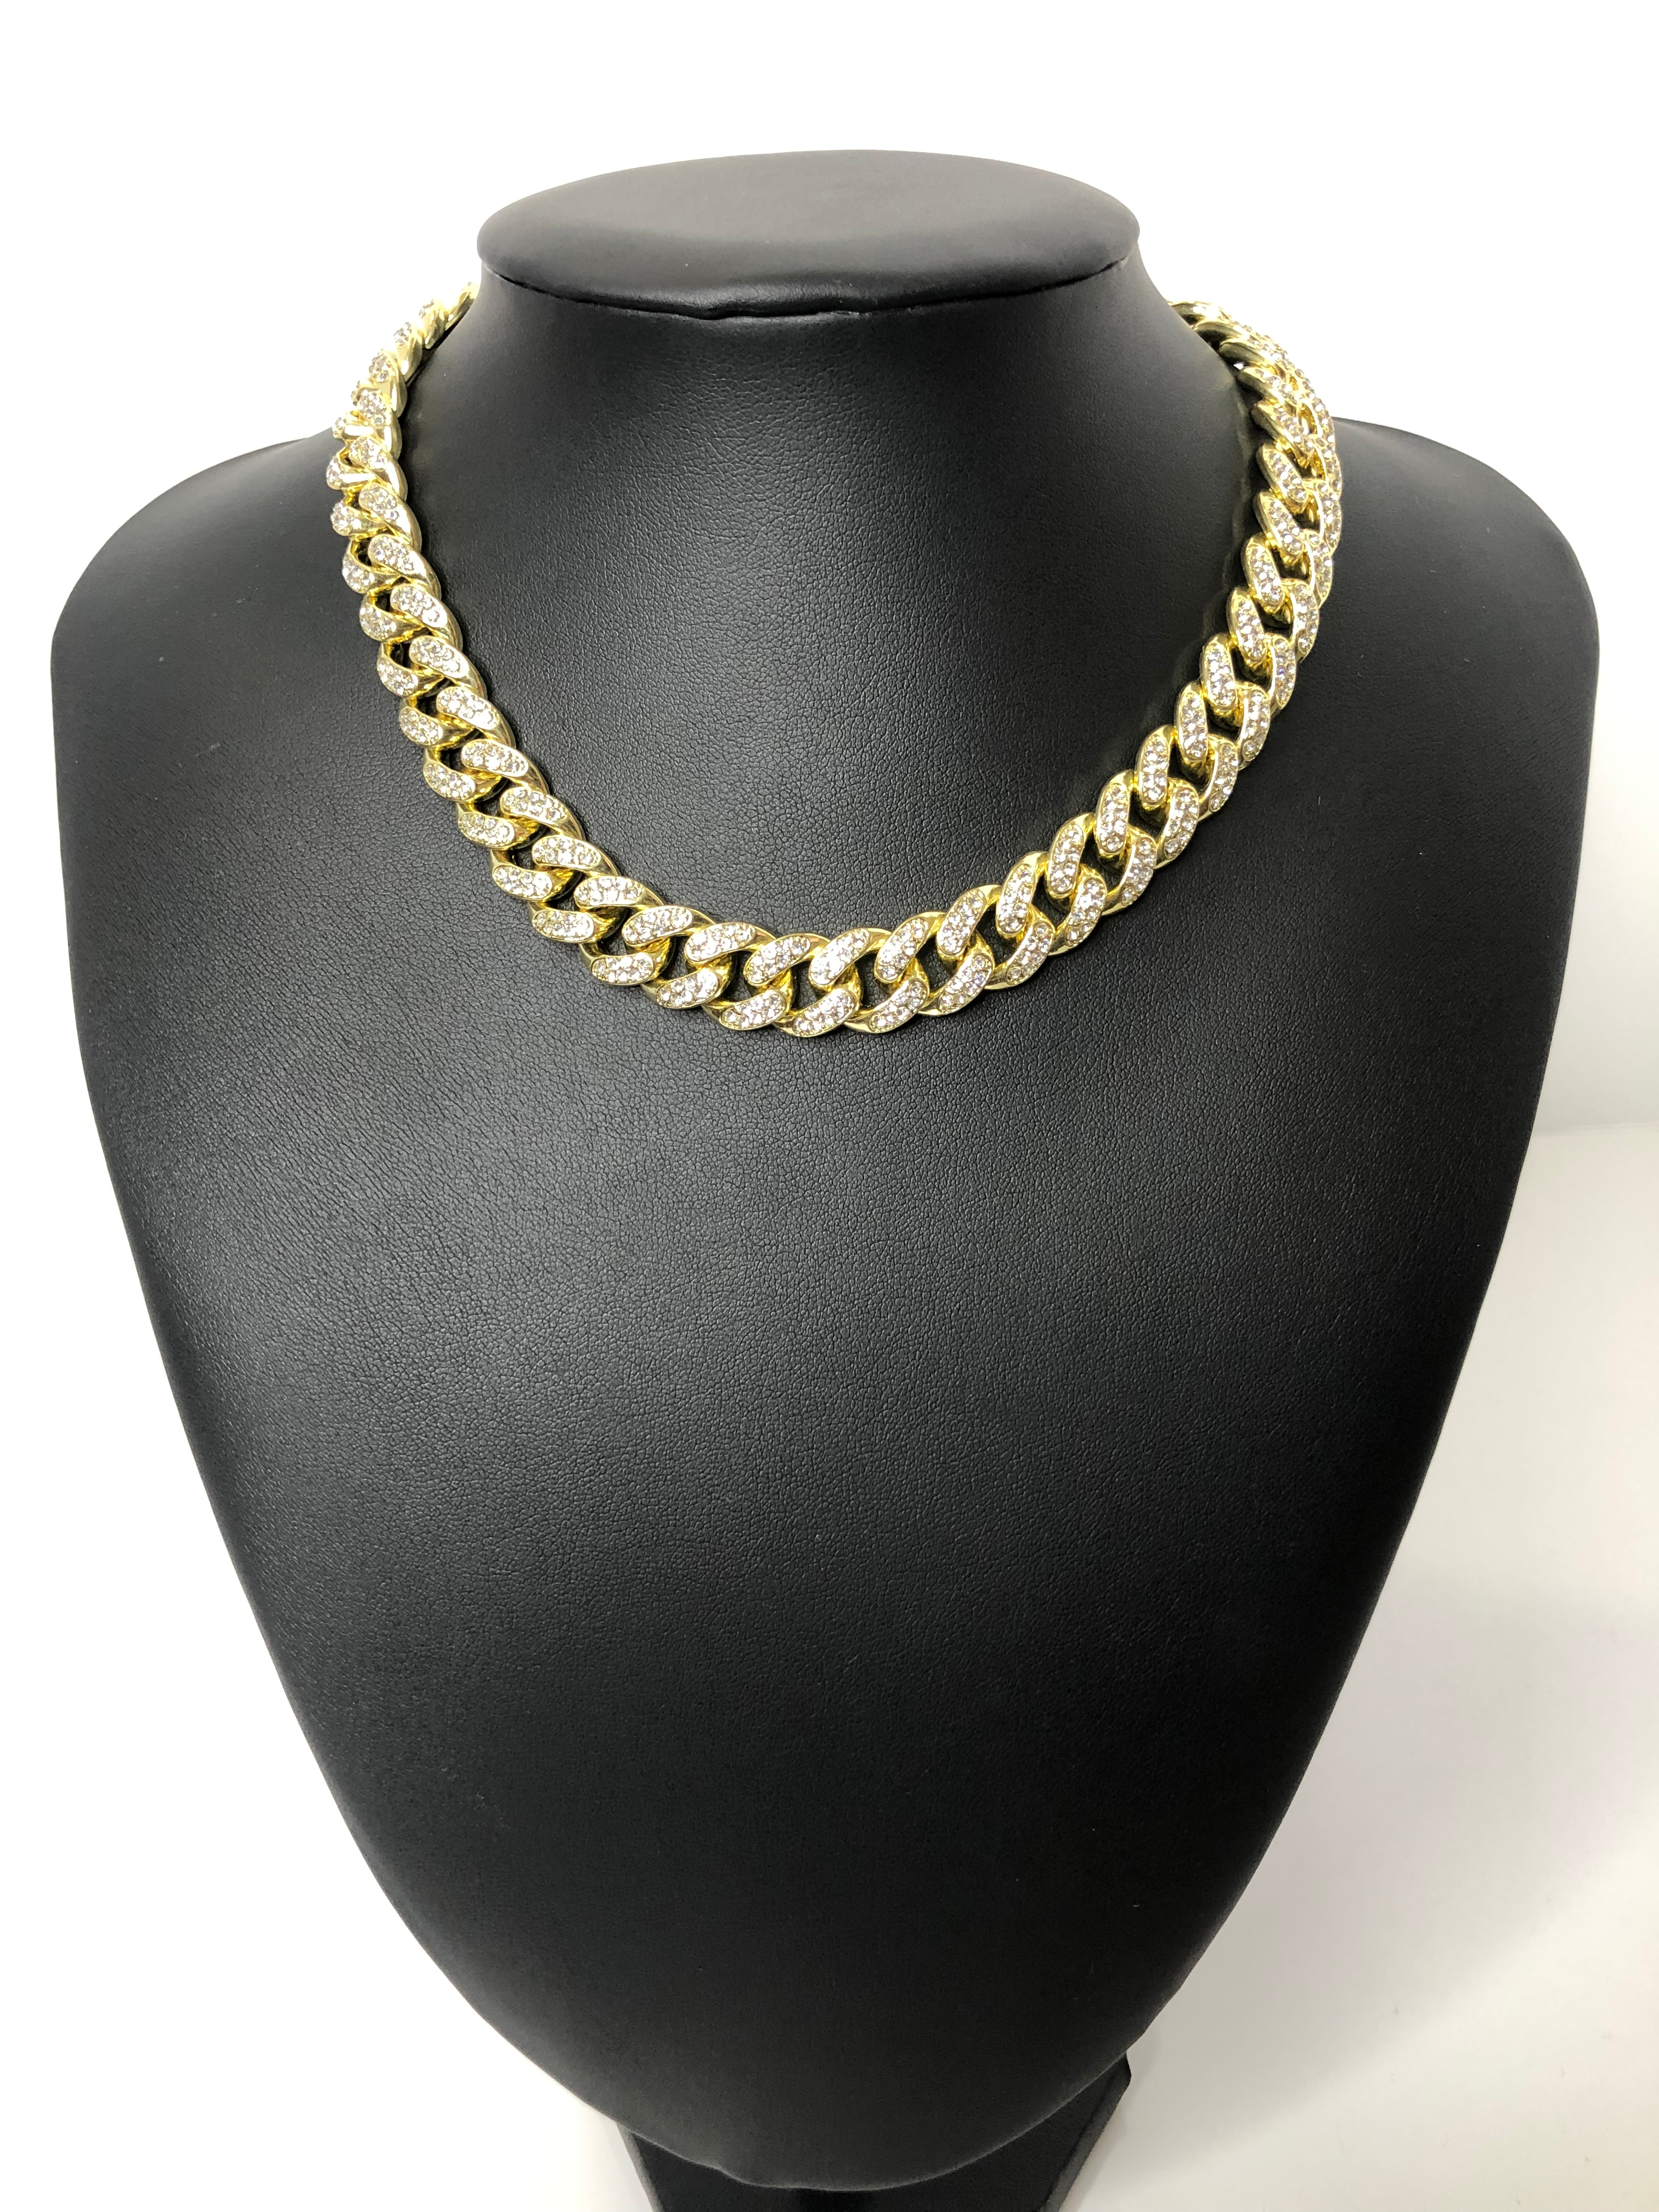 Cuban chokers necklace. 18 inches. Gold plated. Gold, silver and rose gold